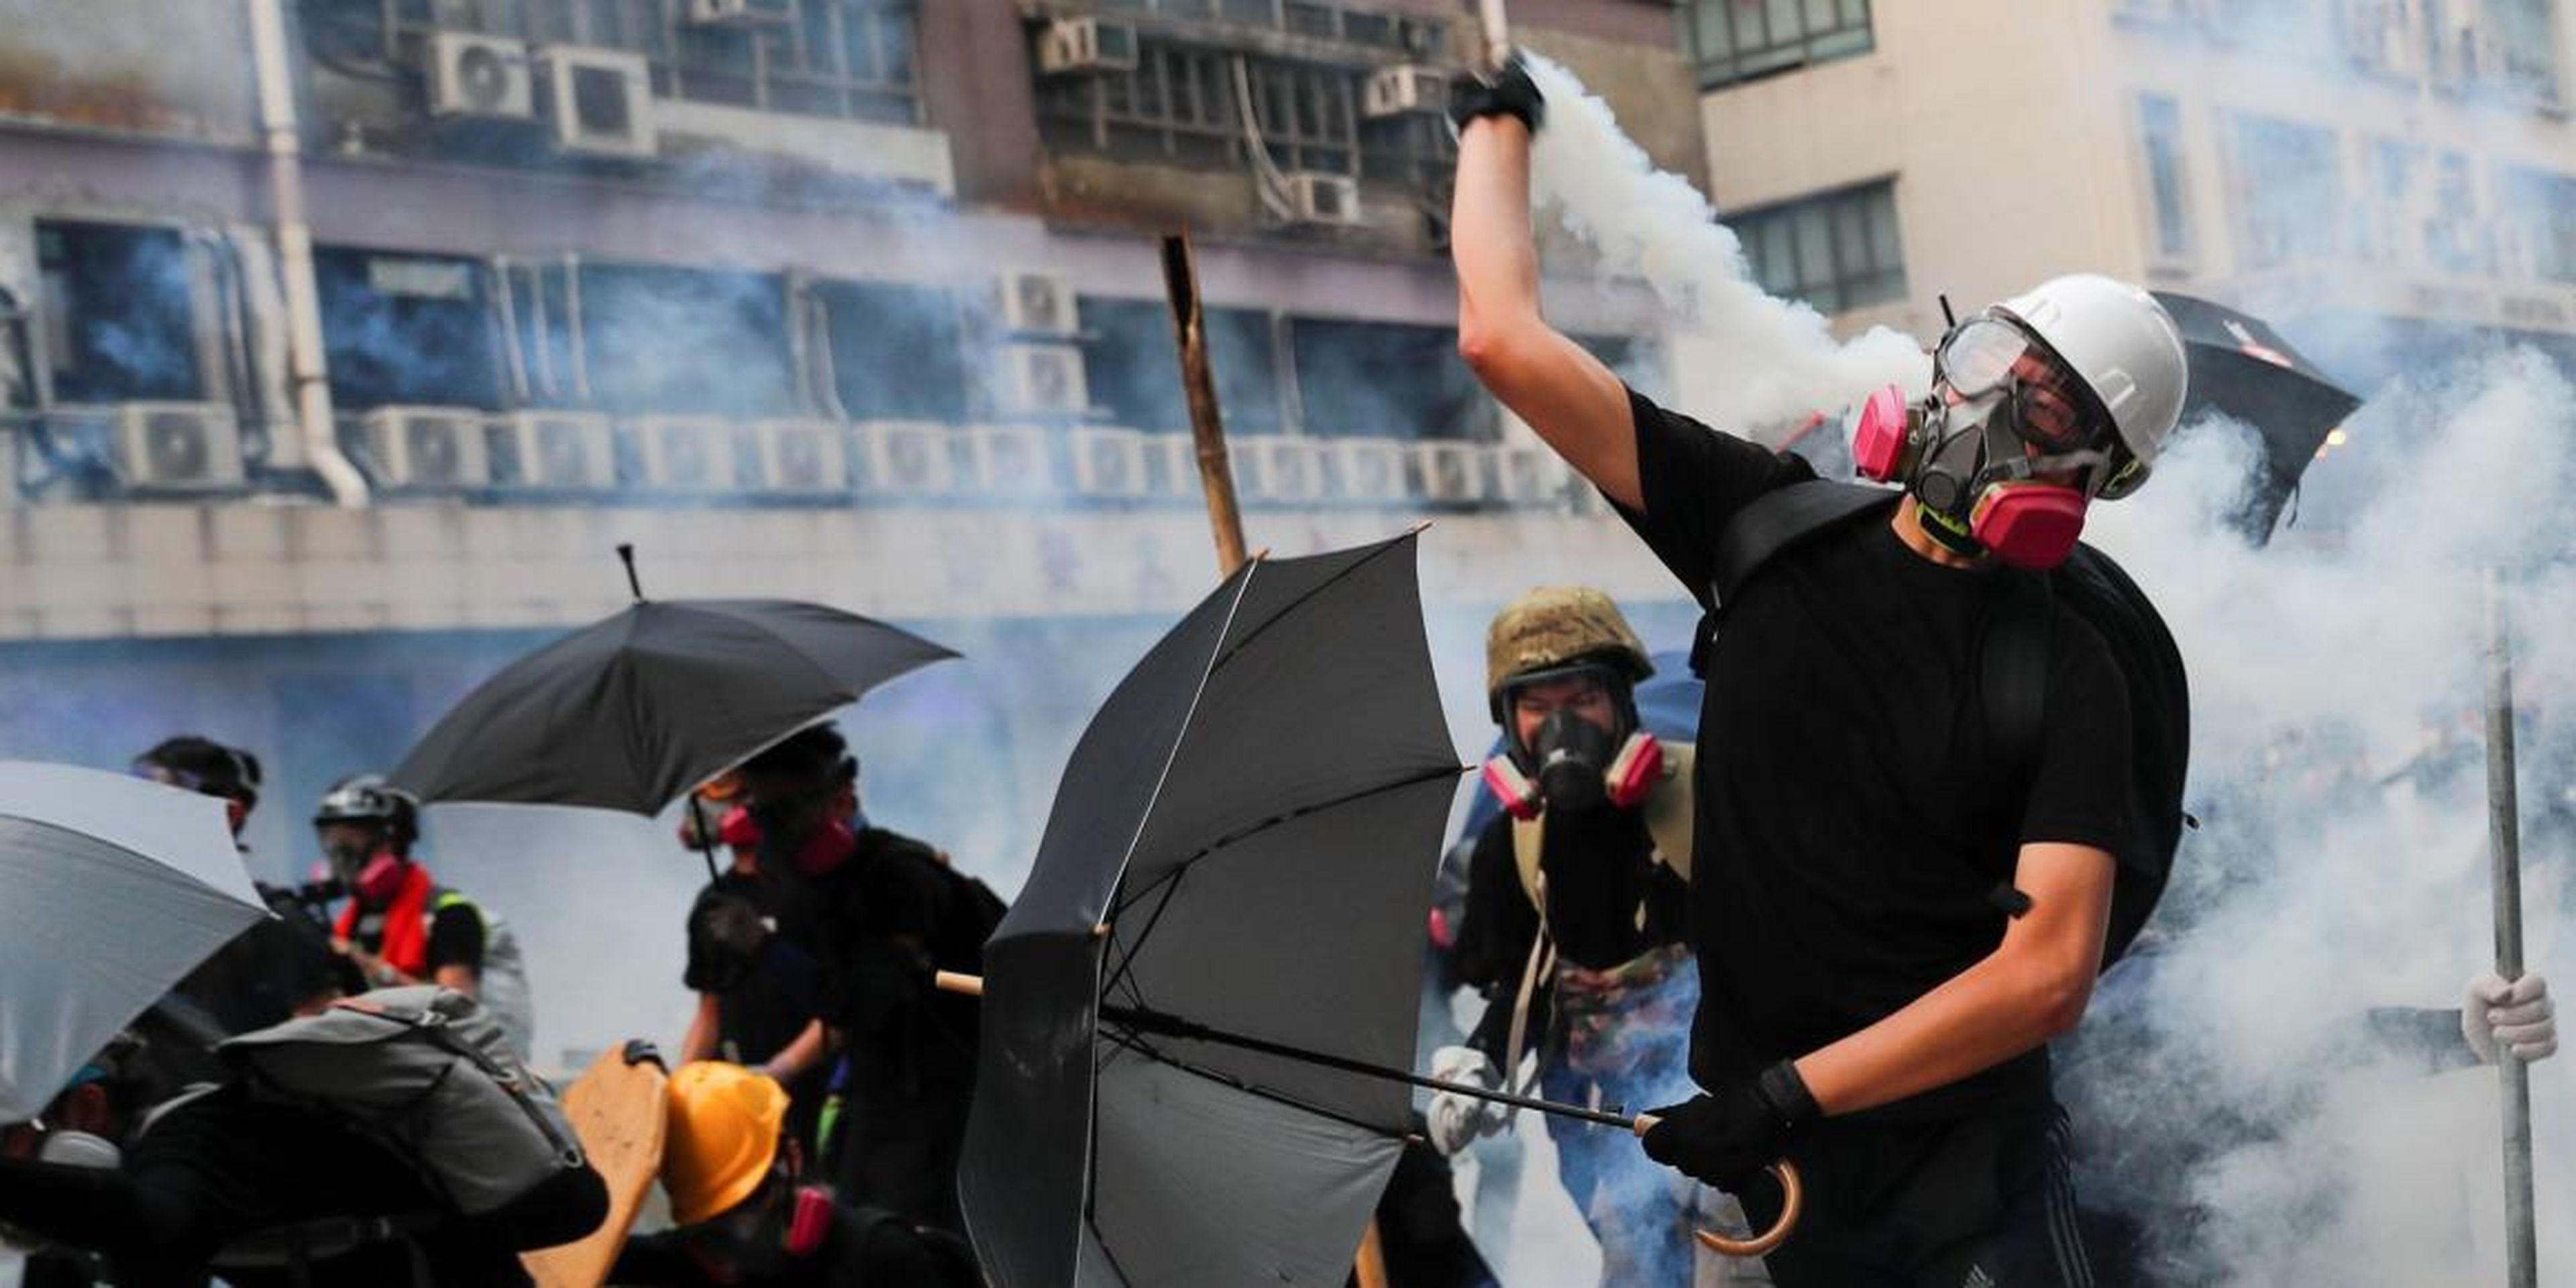 A demonstrator throws back a tear gas canister as they clash with riot police during a protest in Hong Kong, China, August 24, 2019.